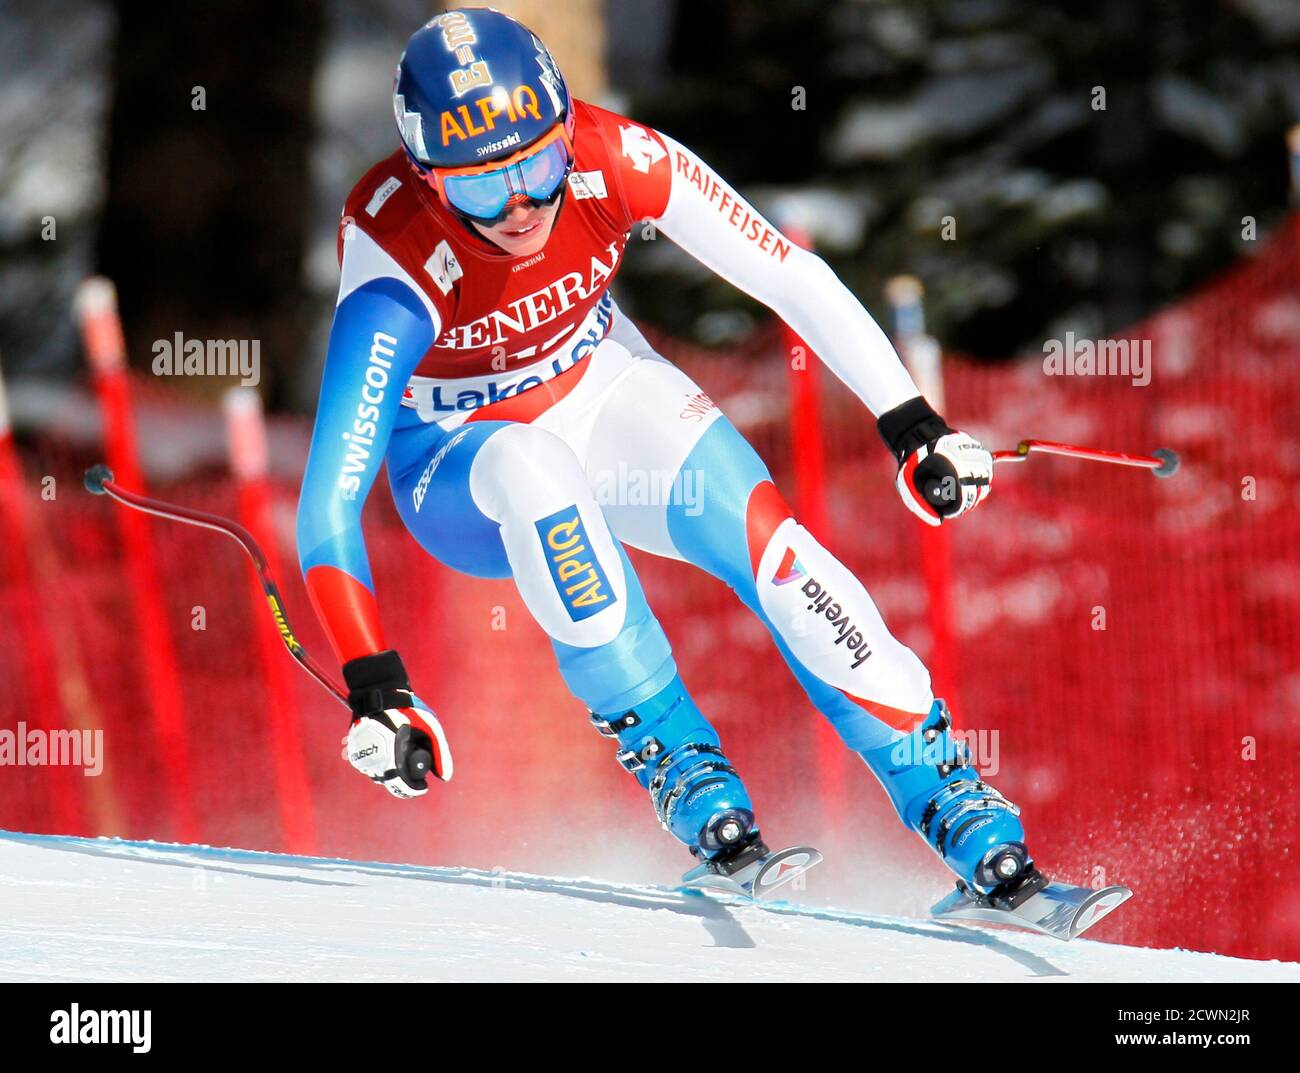 Dominique Gisin of Switzerland makes a turn during the Women's World Cup downhill alpine skiing race in Lake Louise, Alberta December 2, 2011.    REUTERS/Mike Blake     (CANADA - Tags: SPORT SKIING) Stock Photo